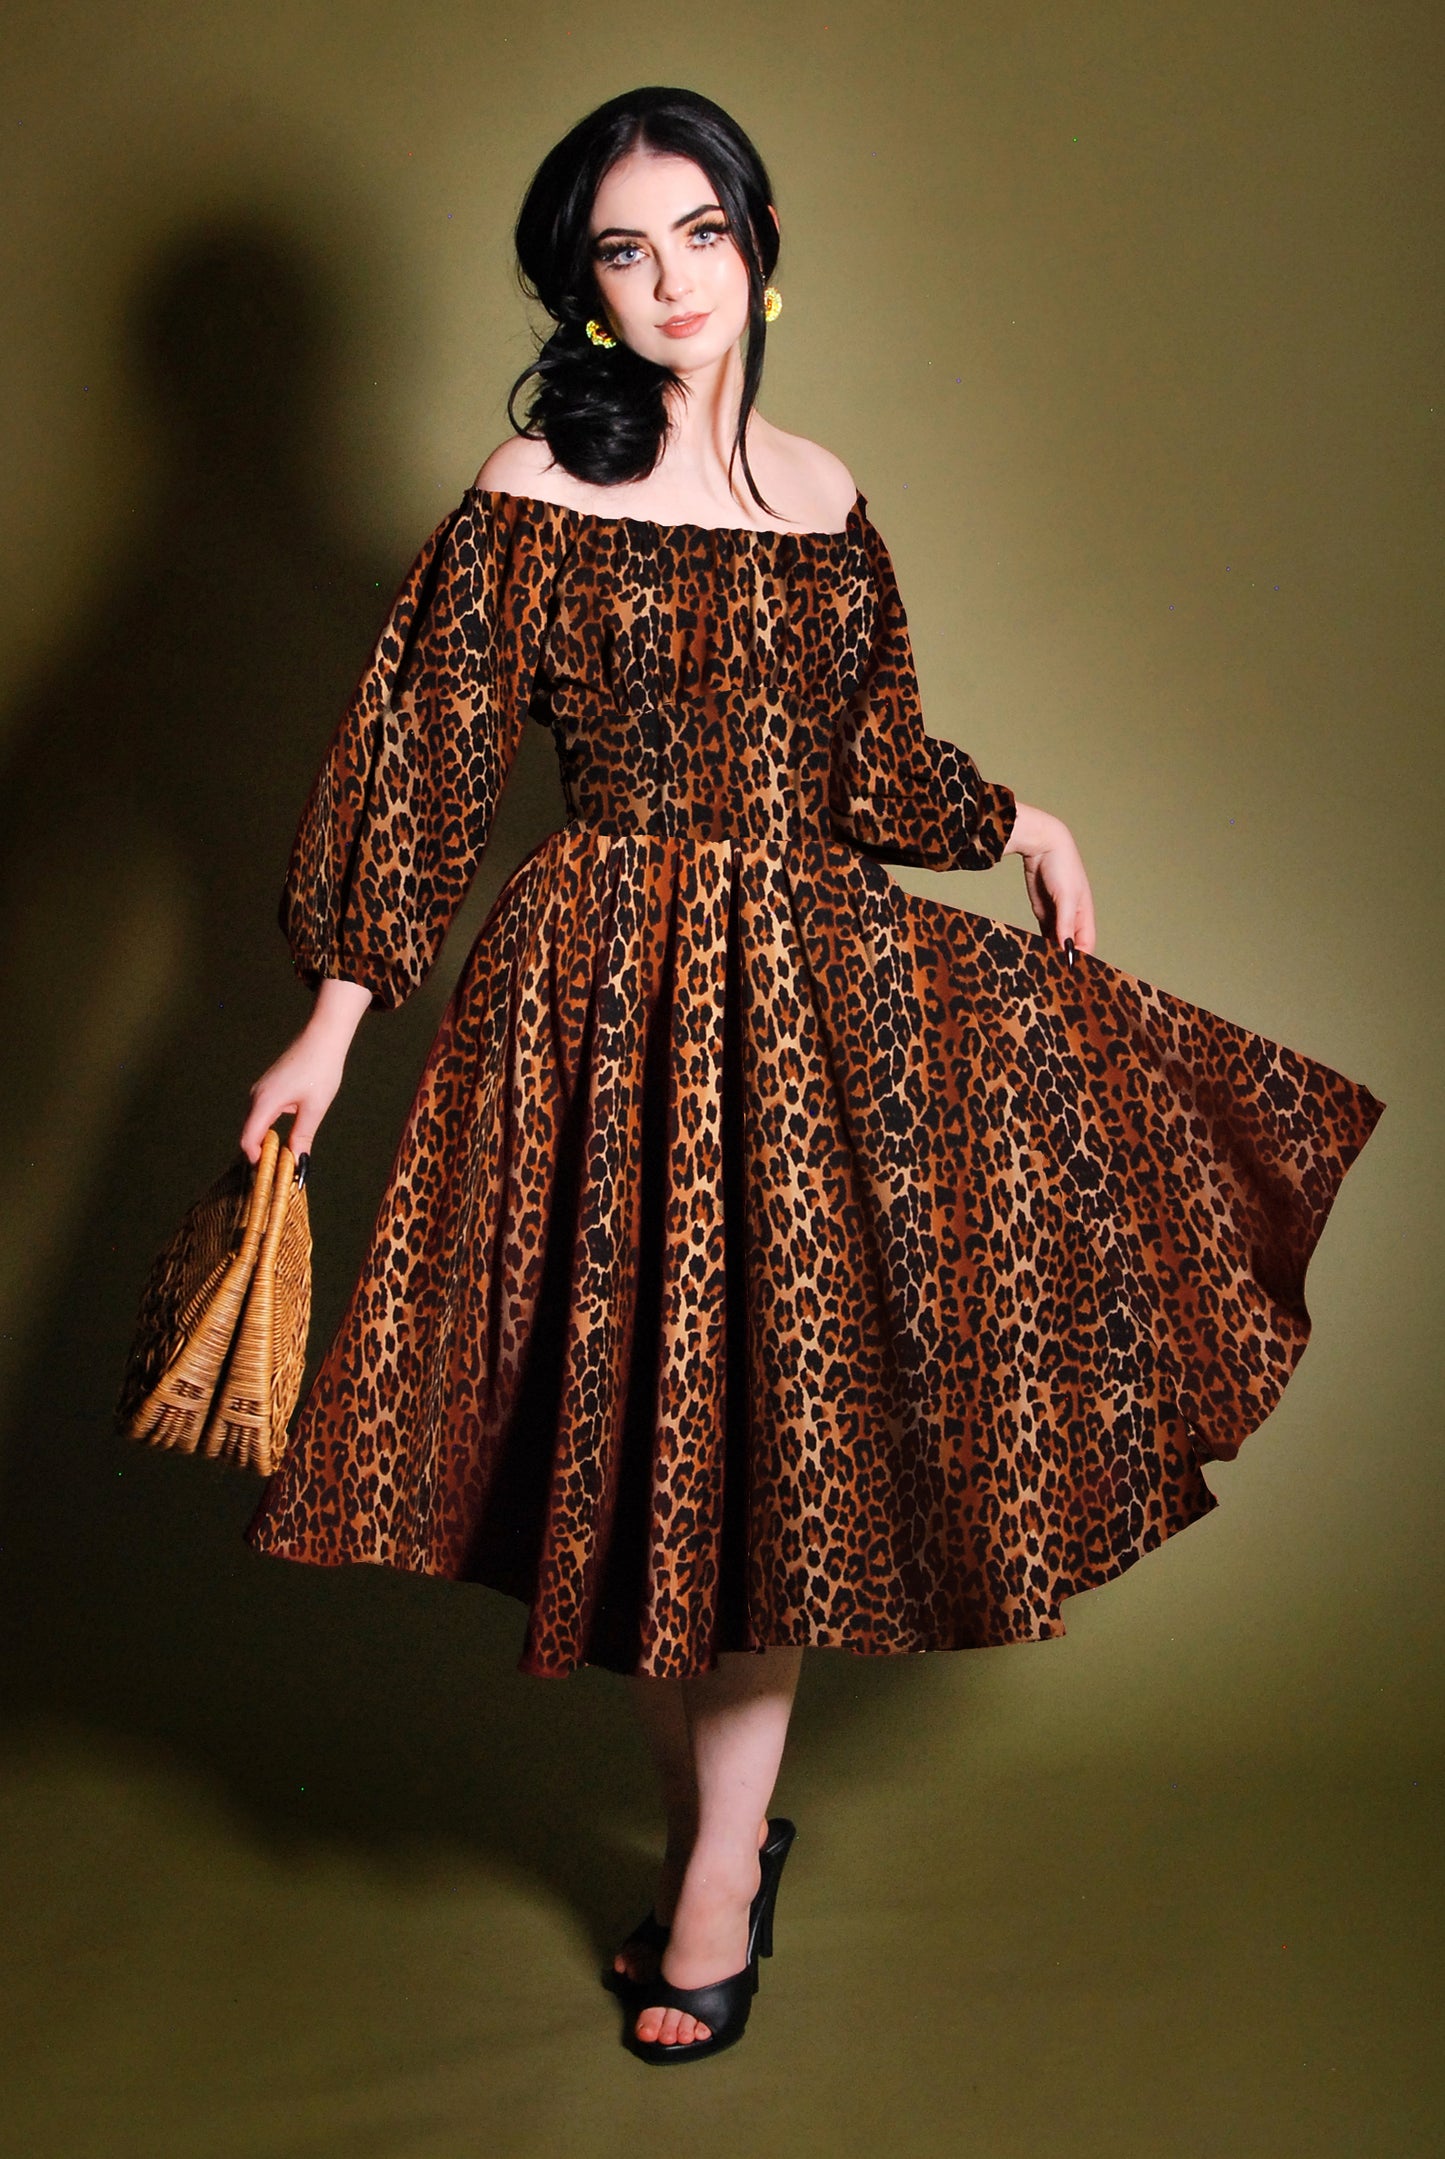 Marie-Thérèse Peasant Dress in Leopard Crepe | Pinup Couture